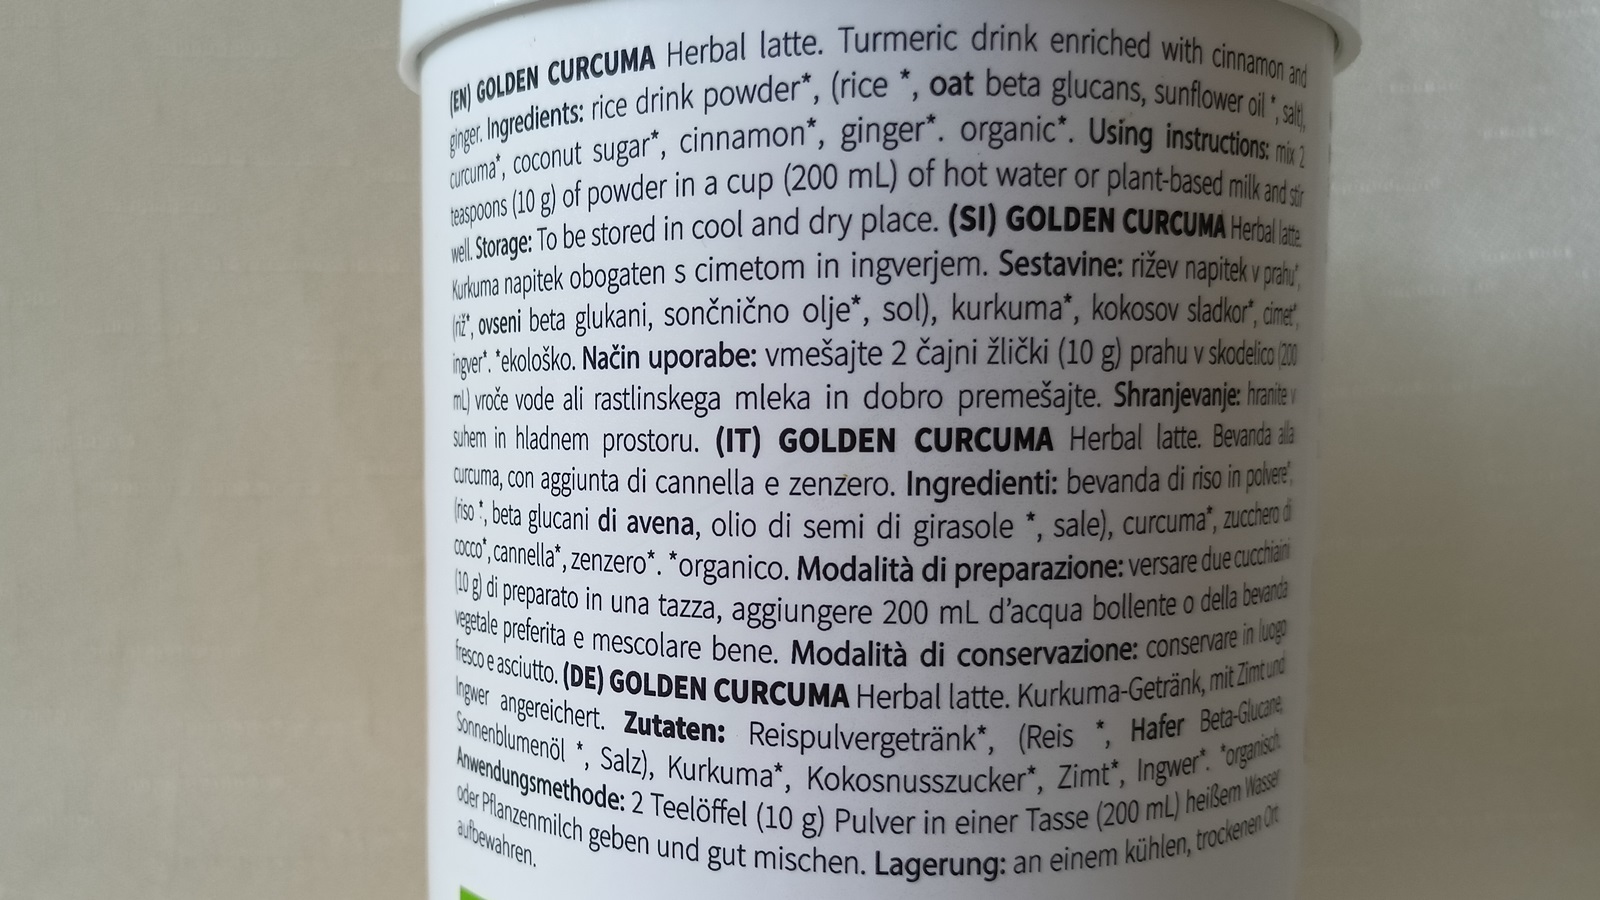 Review: We tried Golden Curcuma Herbal Latte by Nature’s Finest